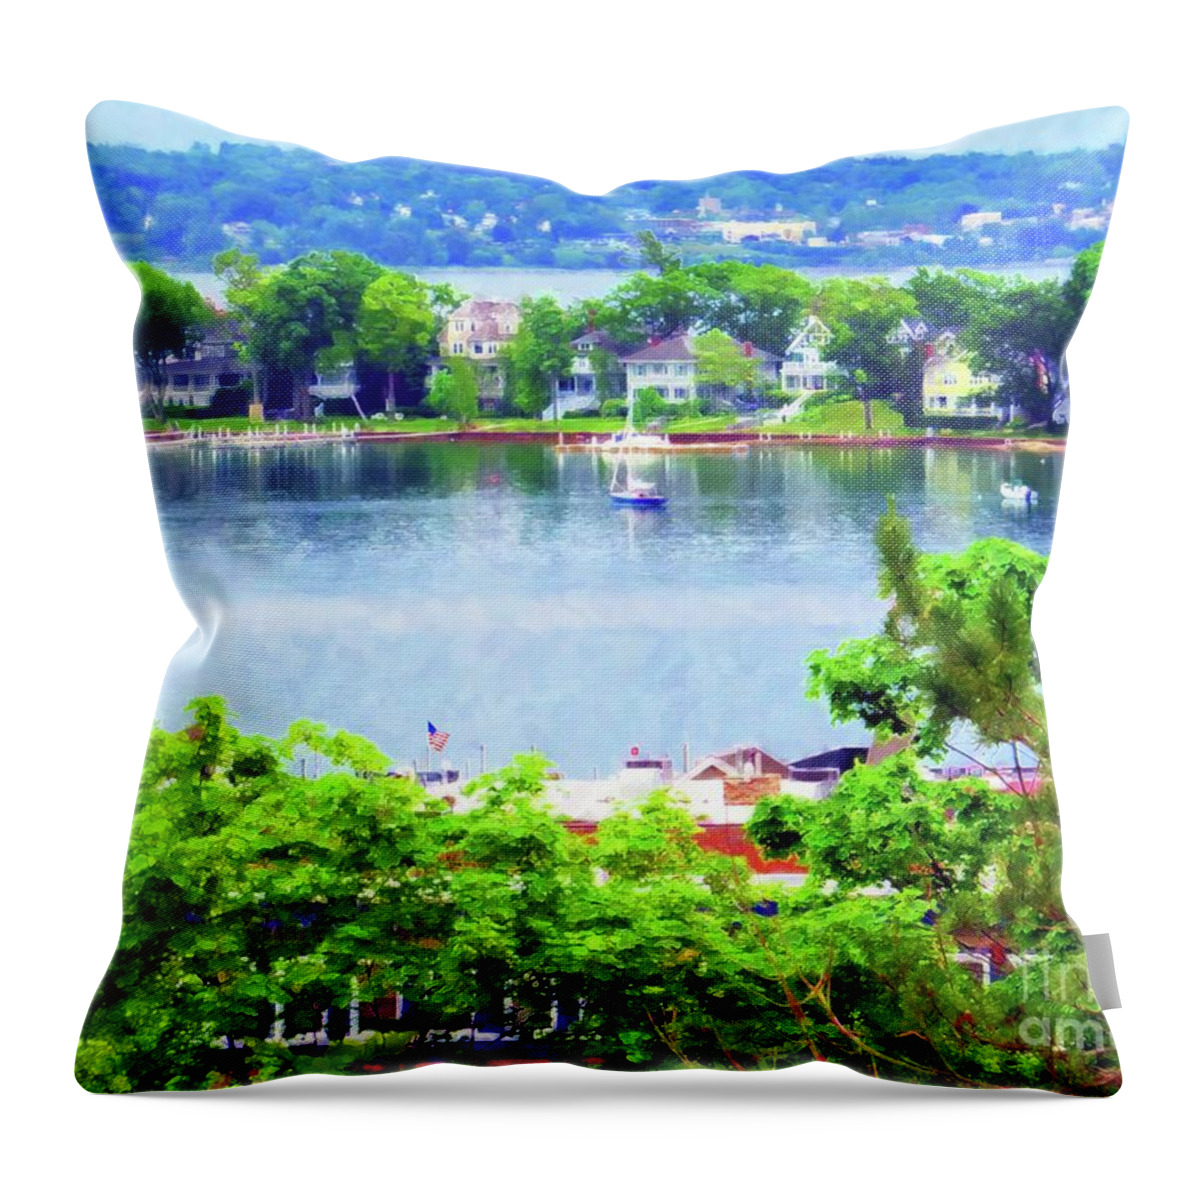 Bay Harbor Mi Throw Pillow featuring the painting Bay Harbor by Desiree Paquette